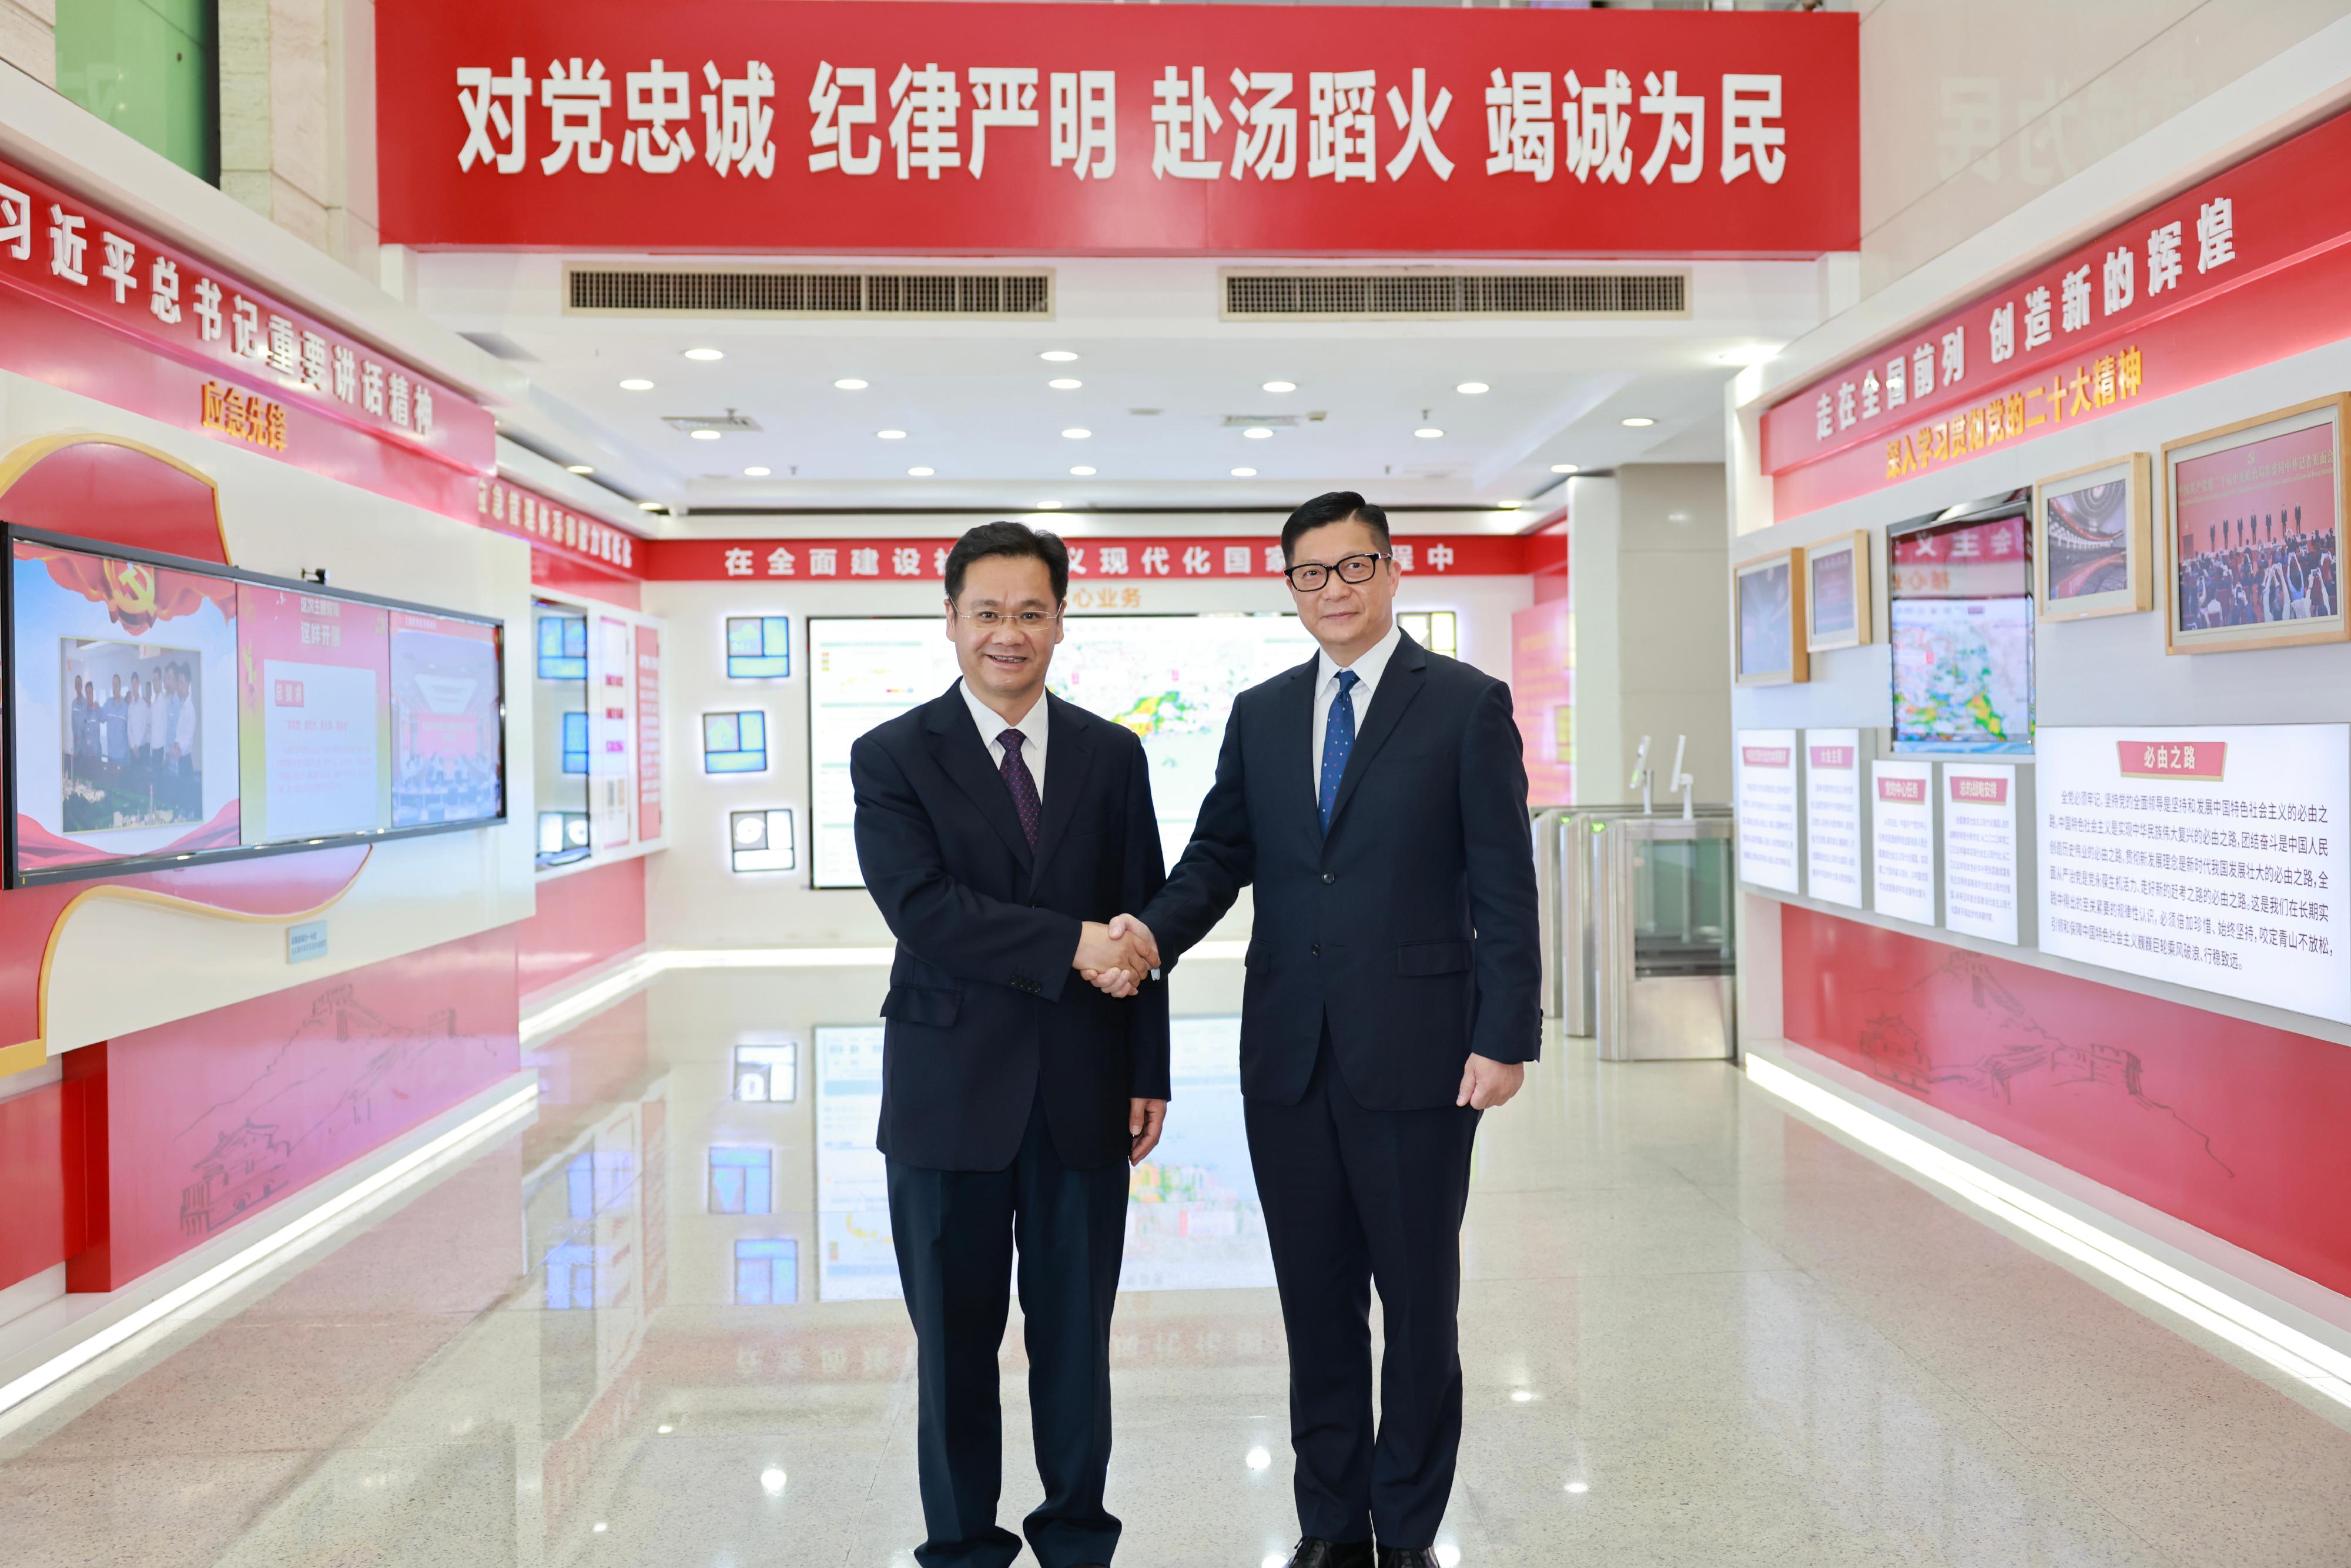 The Secretary for Security, Mr Tang Ping-keung, started his two-day visit to the Guangdong-Hong Kong-Macao Greater Bay Area today (May 24). Photo shows Mr Tang (right) calling on the Director of the Department of Emergency Management of Guangdong Province, Mr Wang Zaihua (left), in Guangzhou.